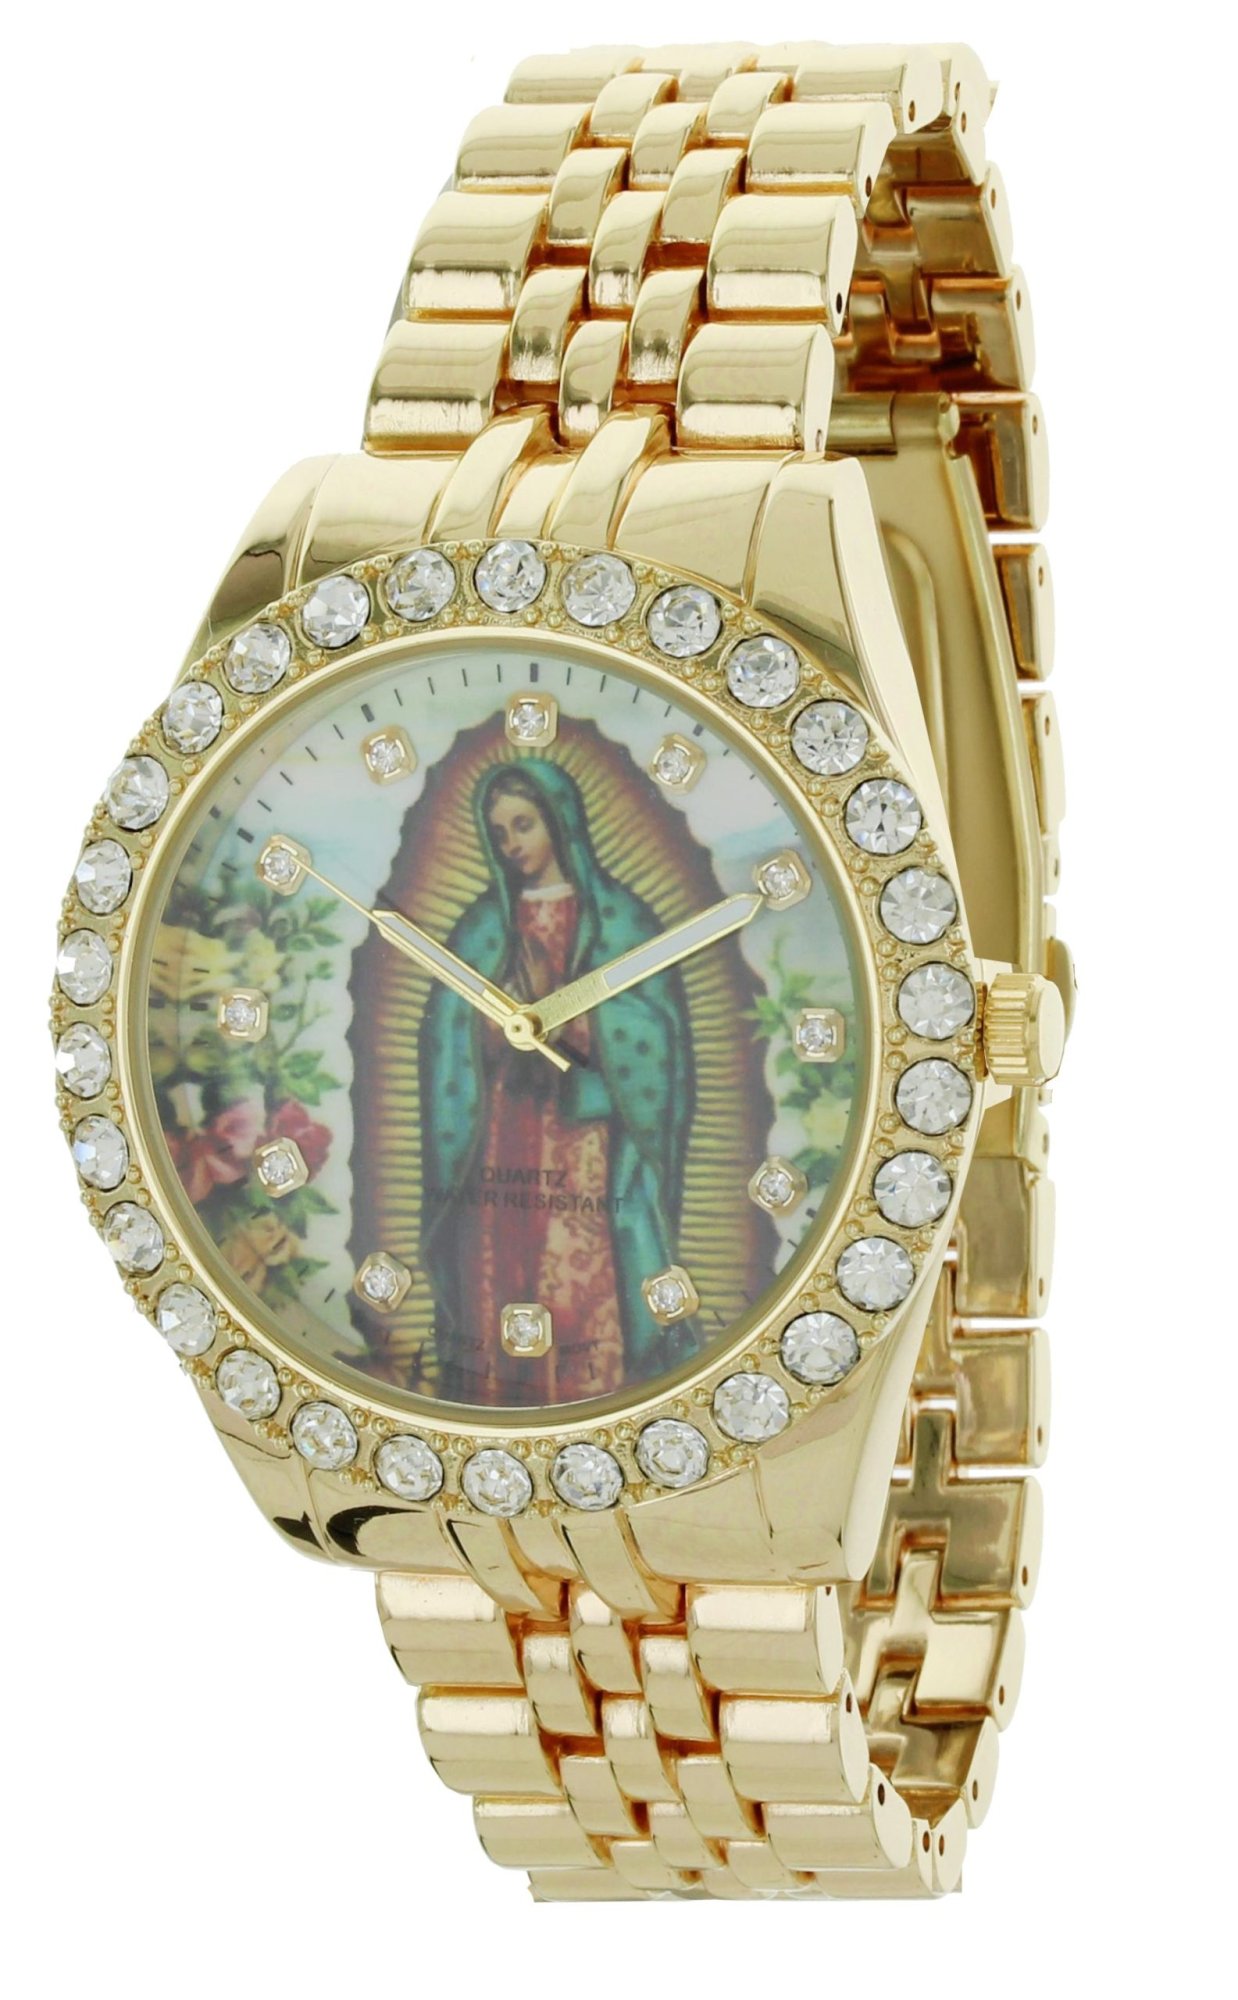 Model: Our Lady of Guadalupe Gold-Tone Metal Bracelet Watch With Neckless and Cross Pendent Set